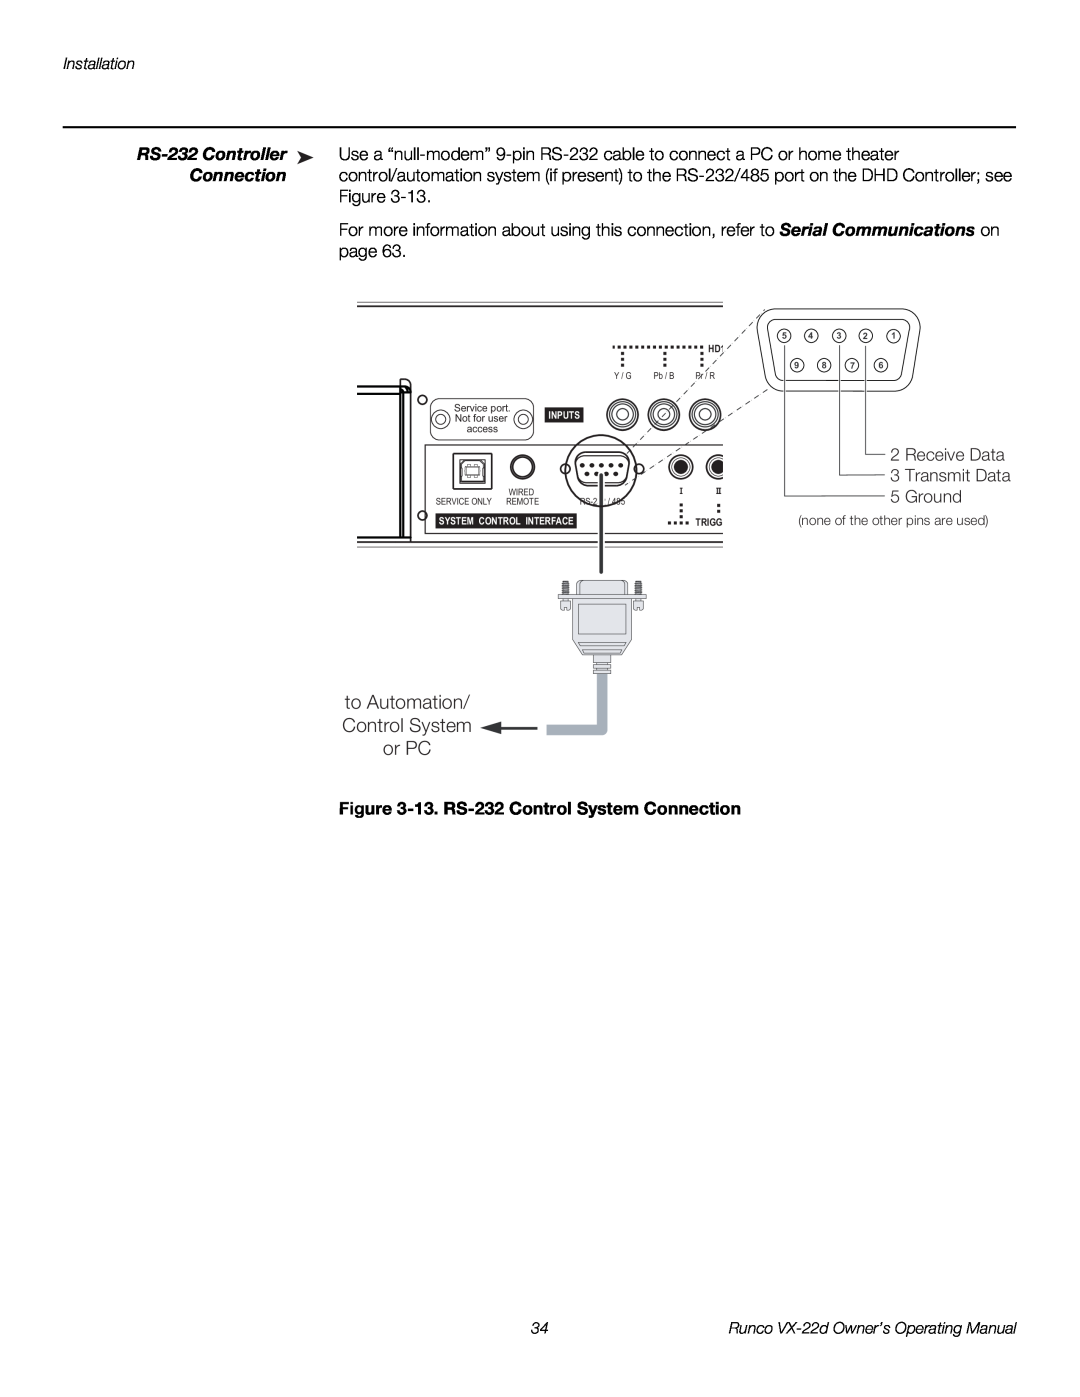 Runco VX-22D manual to Automation/ Control System or PC, RS-232 Controller, 13. RS-232 Control System Connection 